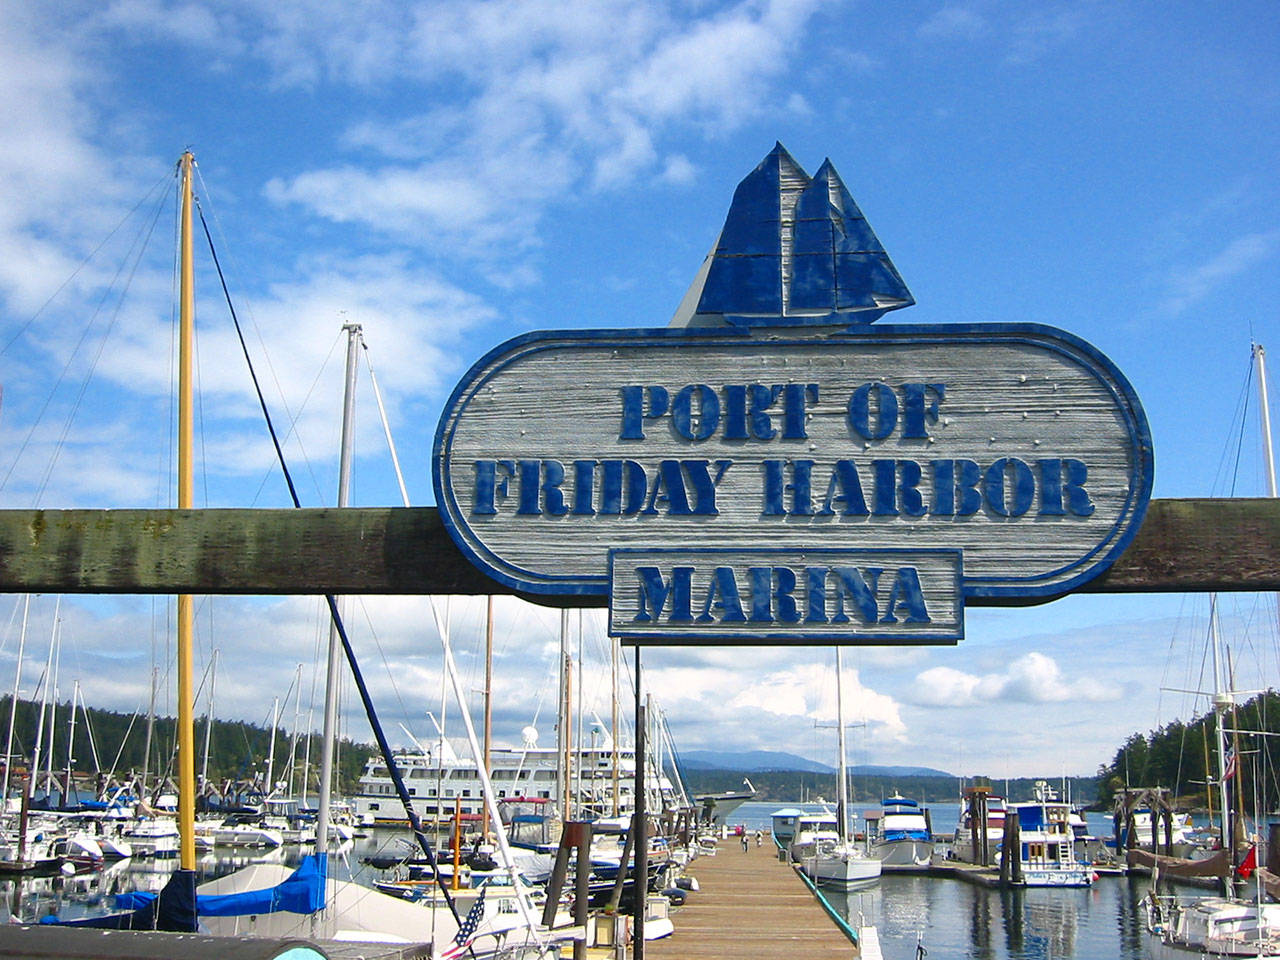 Port of Friday Harbor candidates, in Nov. 7 election, face off